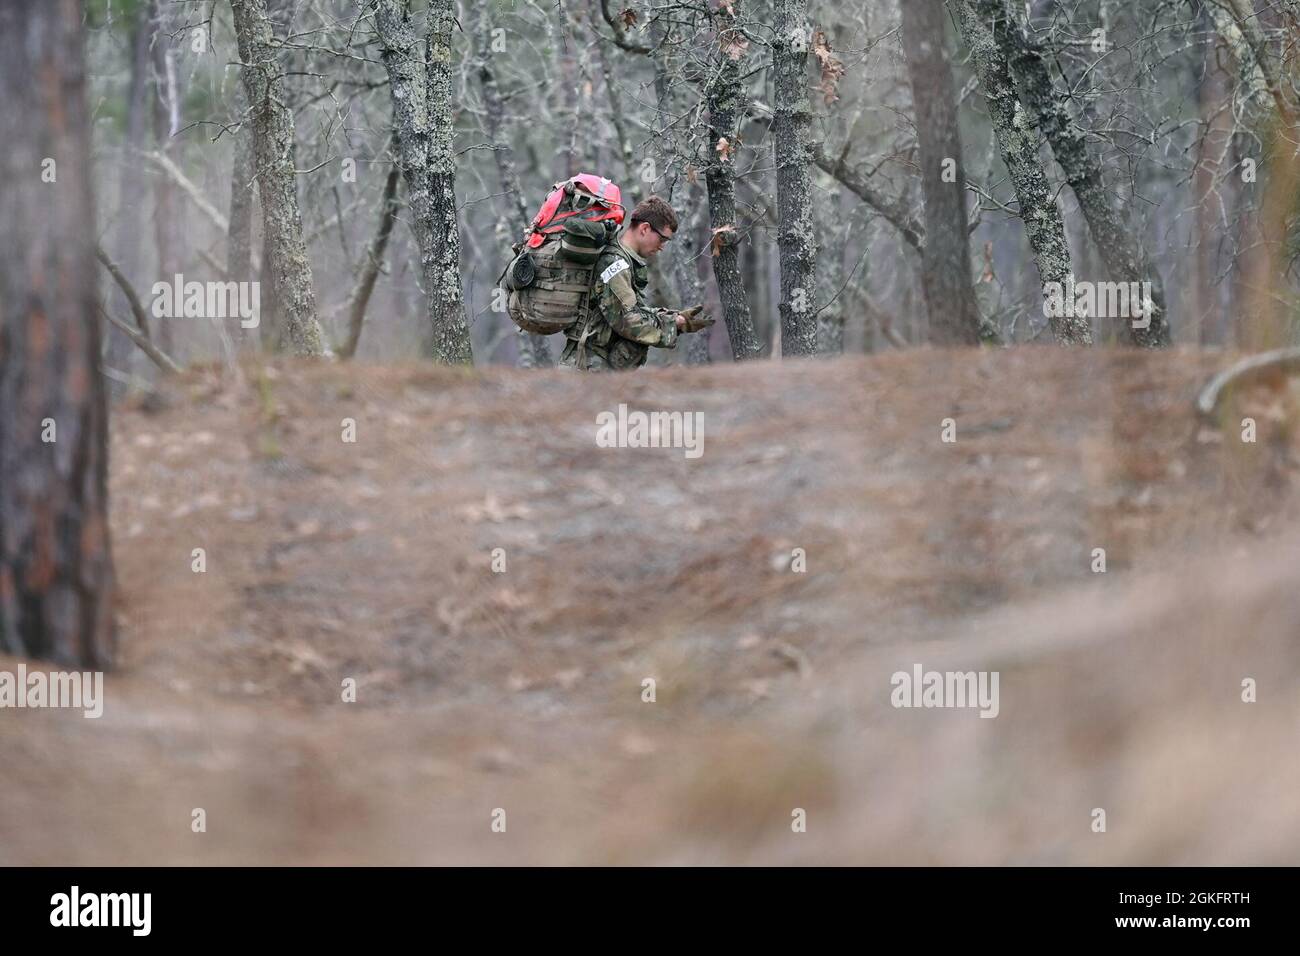 https://c8.alamy.com/comp/2GKFRTH/a-special-forces-candidate-from-the-us-army-john-f-kennedy-special-warfare-center-and-school-walks-through-a-wooded-area-during-land-navigation-training-as-part-of-special-forces-assessment-and-selection-near-hoffman-north-carolina-april-10-2021-candidates-who-attended-the-three-week-assessment-and-selection-were-evaluated-on-their-ability-to-work-individually-and-as-a-team-2GKFRTH.jpg